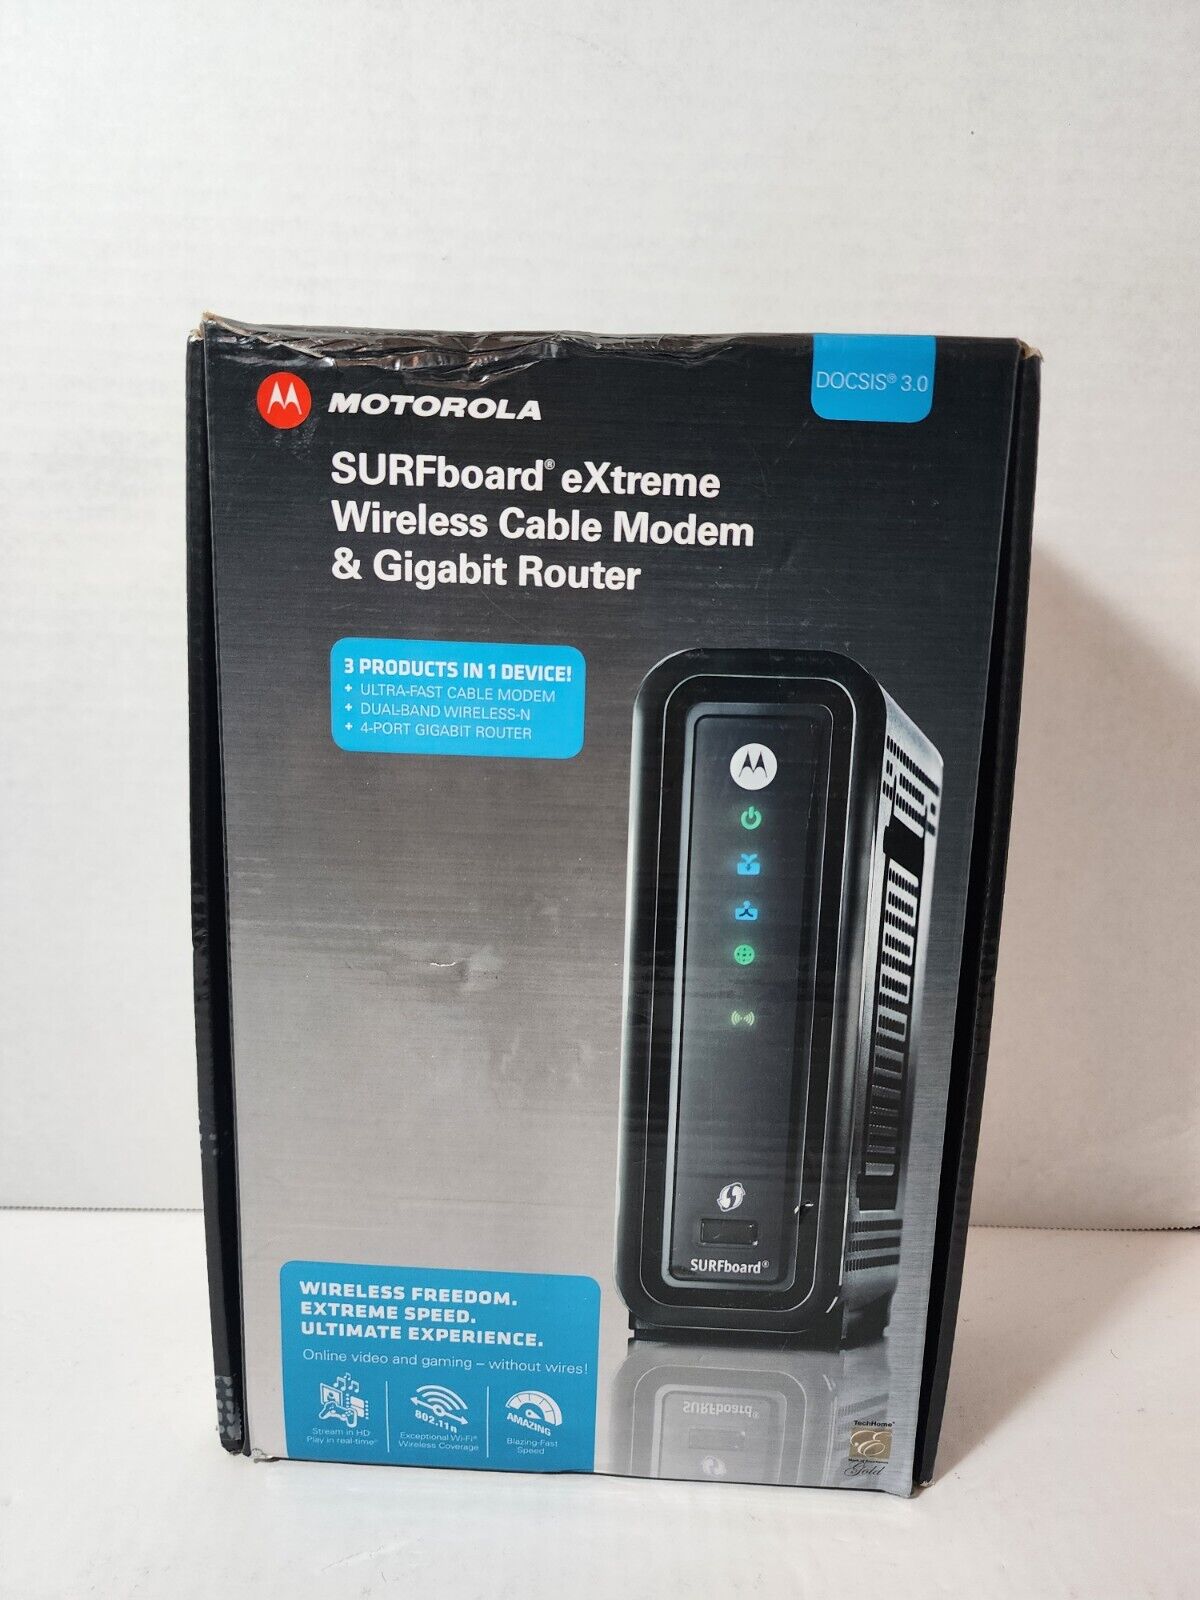 Motorola SURFboard eXtreme SBG6580-G228 WiFi Cable Modem/Router 